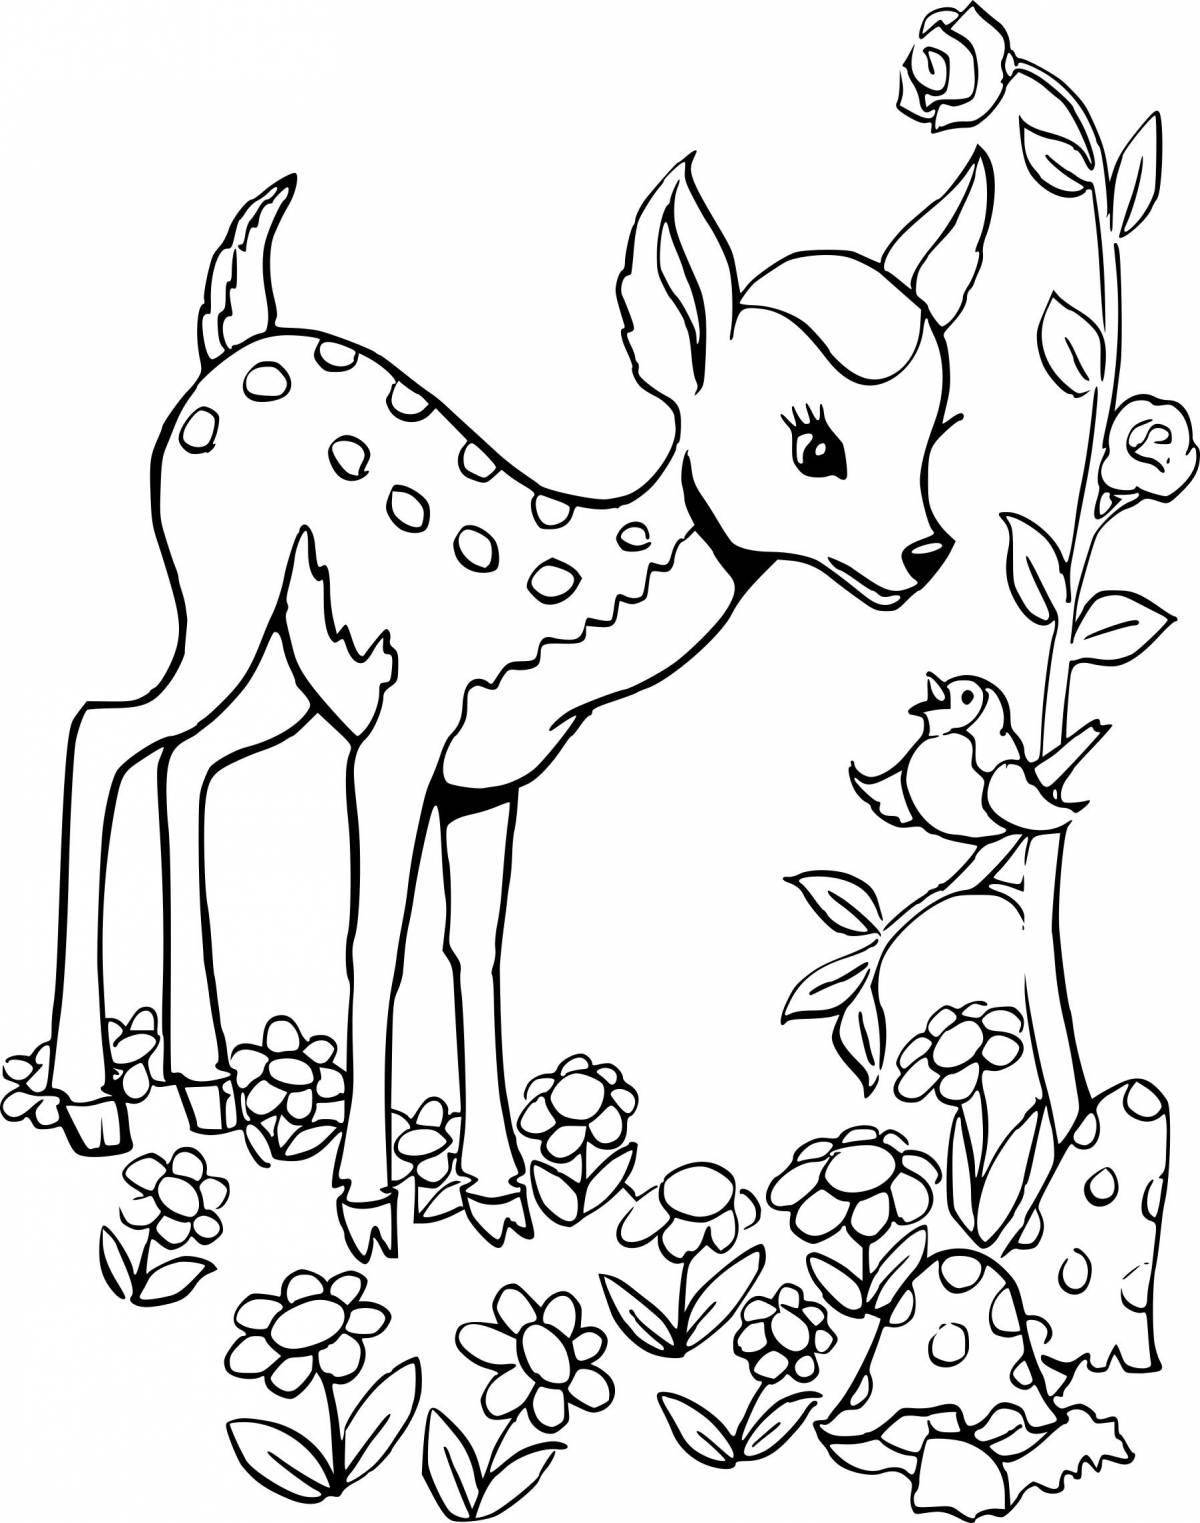 A fascinating coloring book animals for children 10 years old